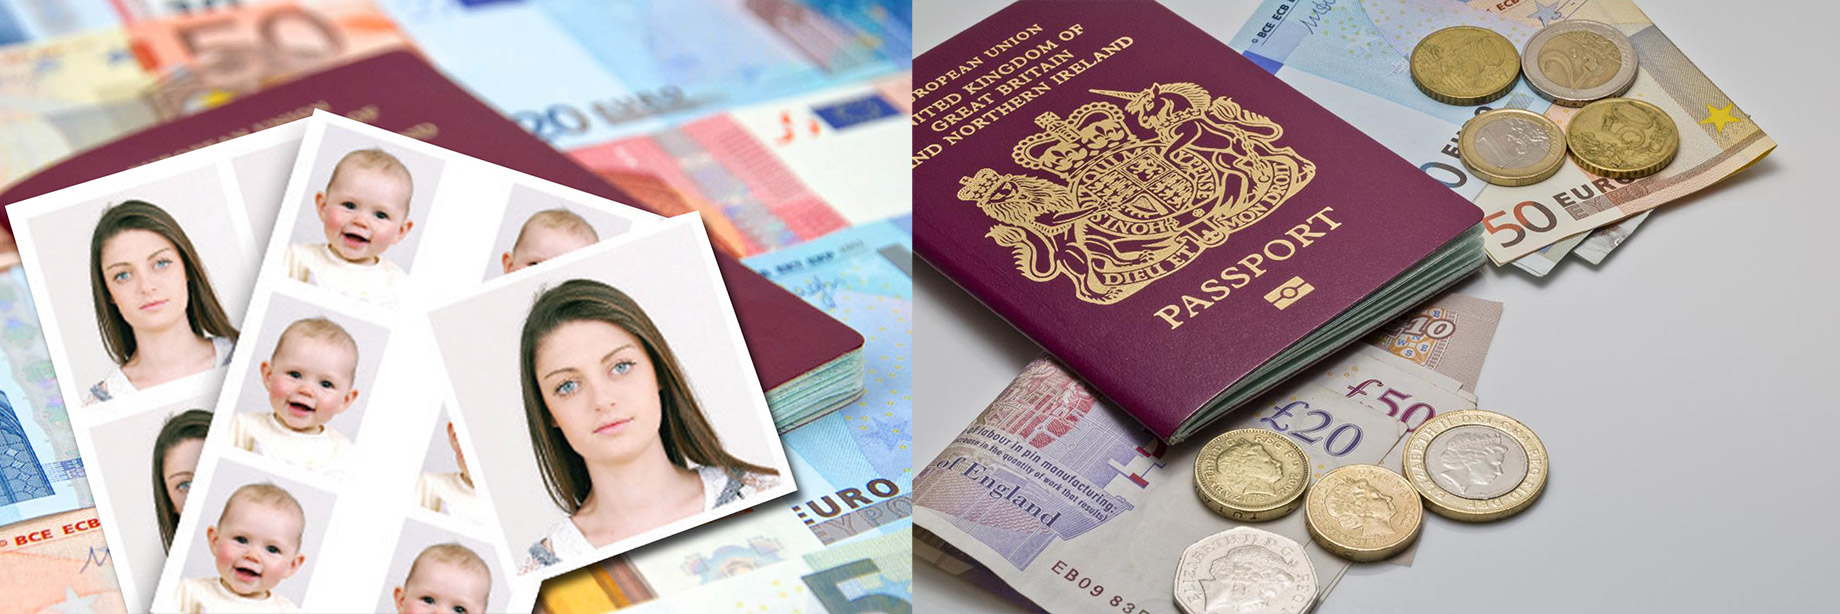 Passport and Visa Photos for any country